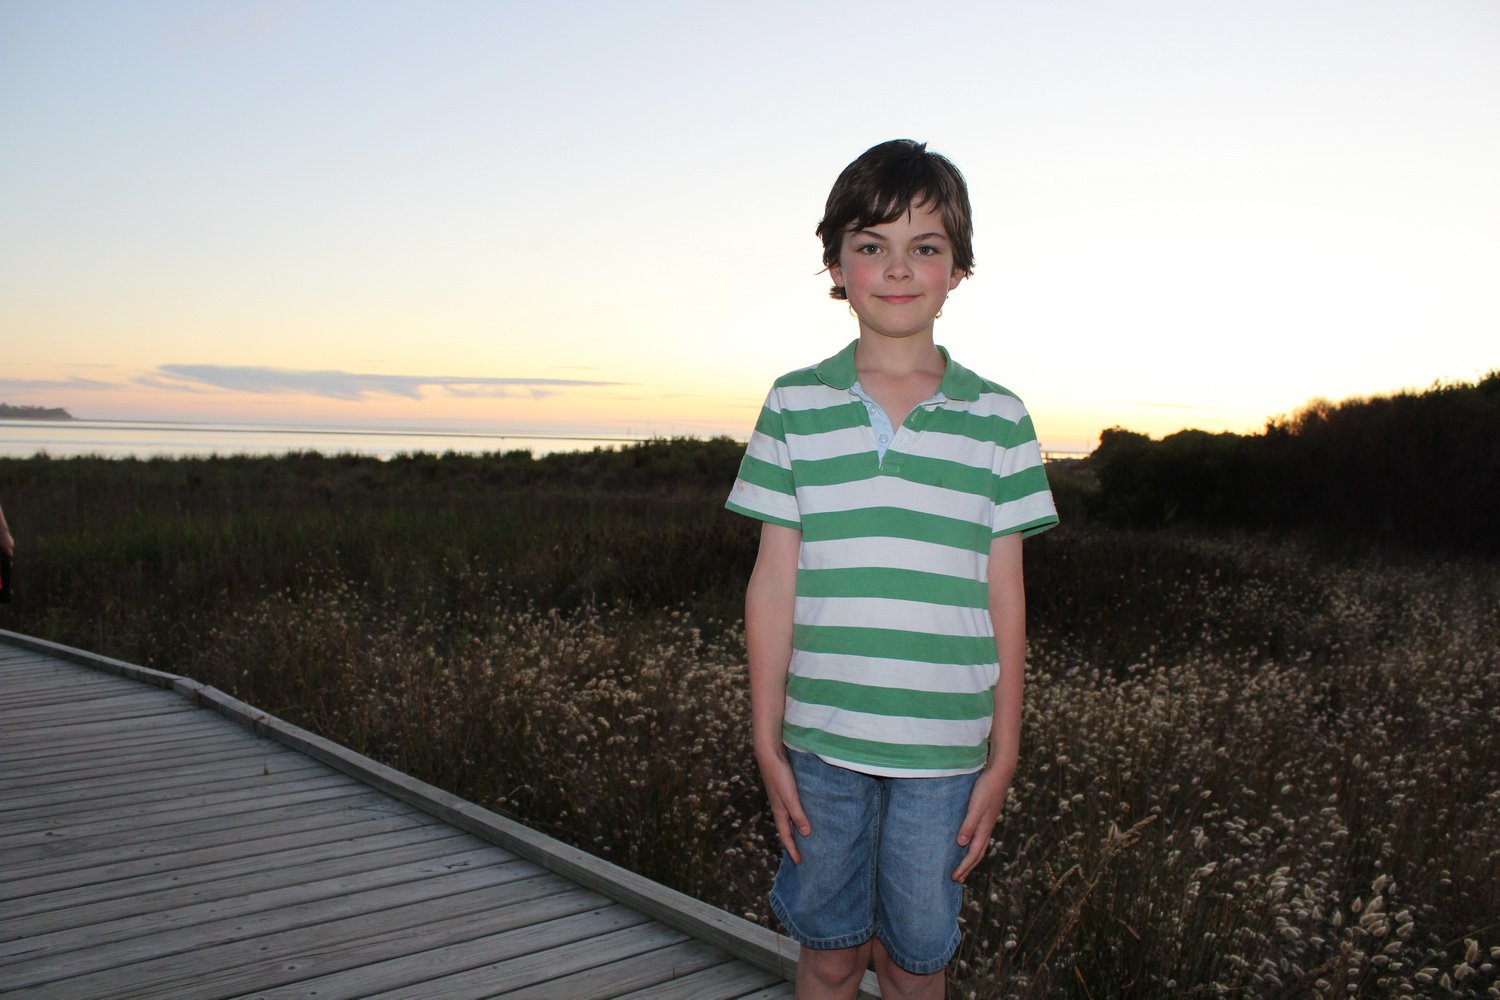 Connor and Sunset. New Years Break at Inverloch for 2011/2012.